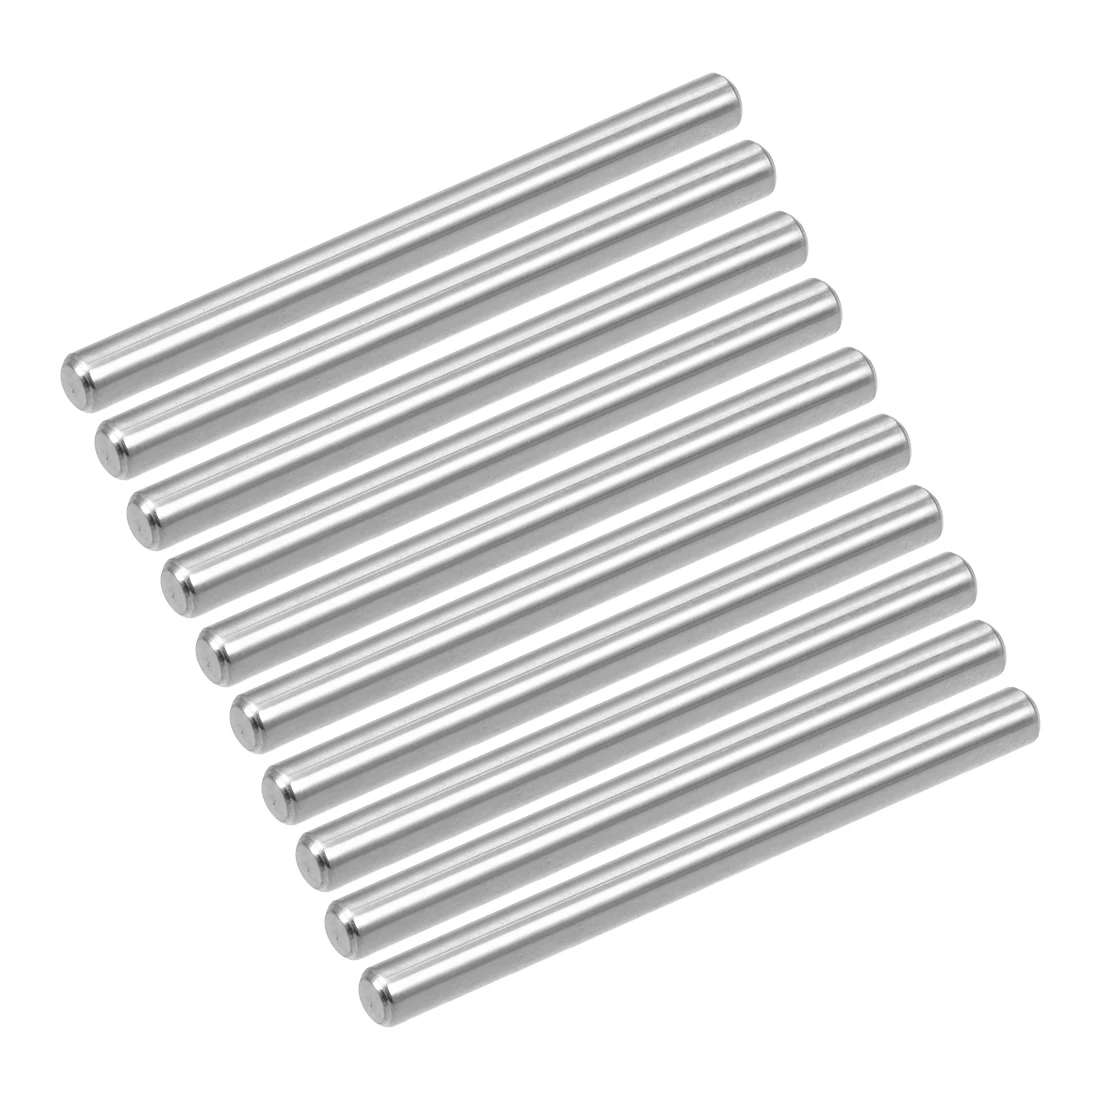 

UXCELL 10Pcs Dowel Pin M4 M5 M6 M8 M10 Length 16-60mm 304 Stainless Steel Shelf Support Pin Fasten Elements